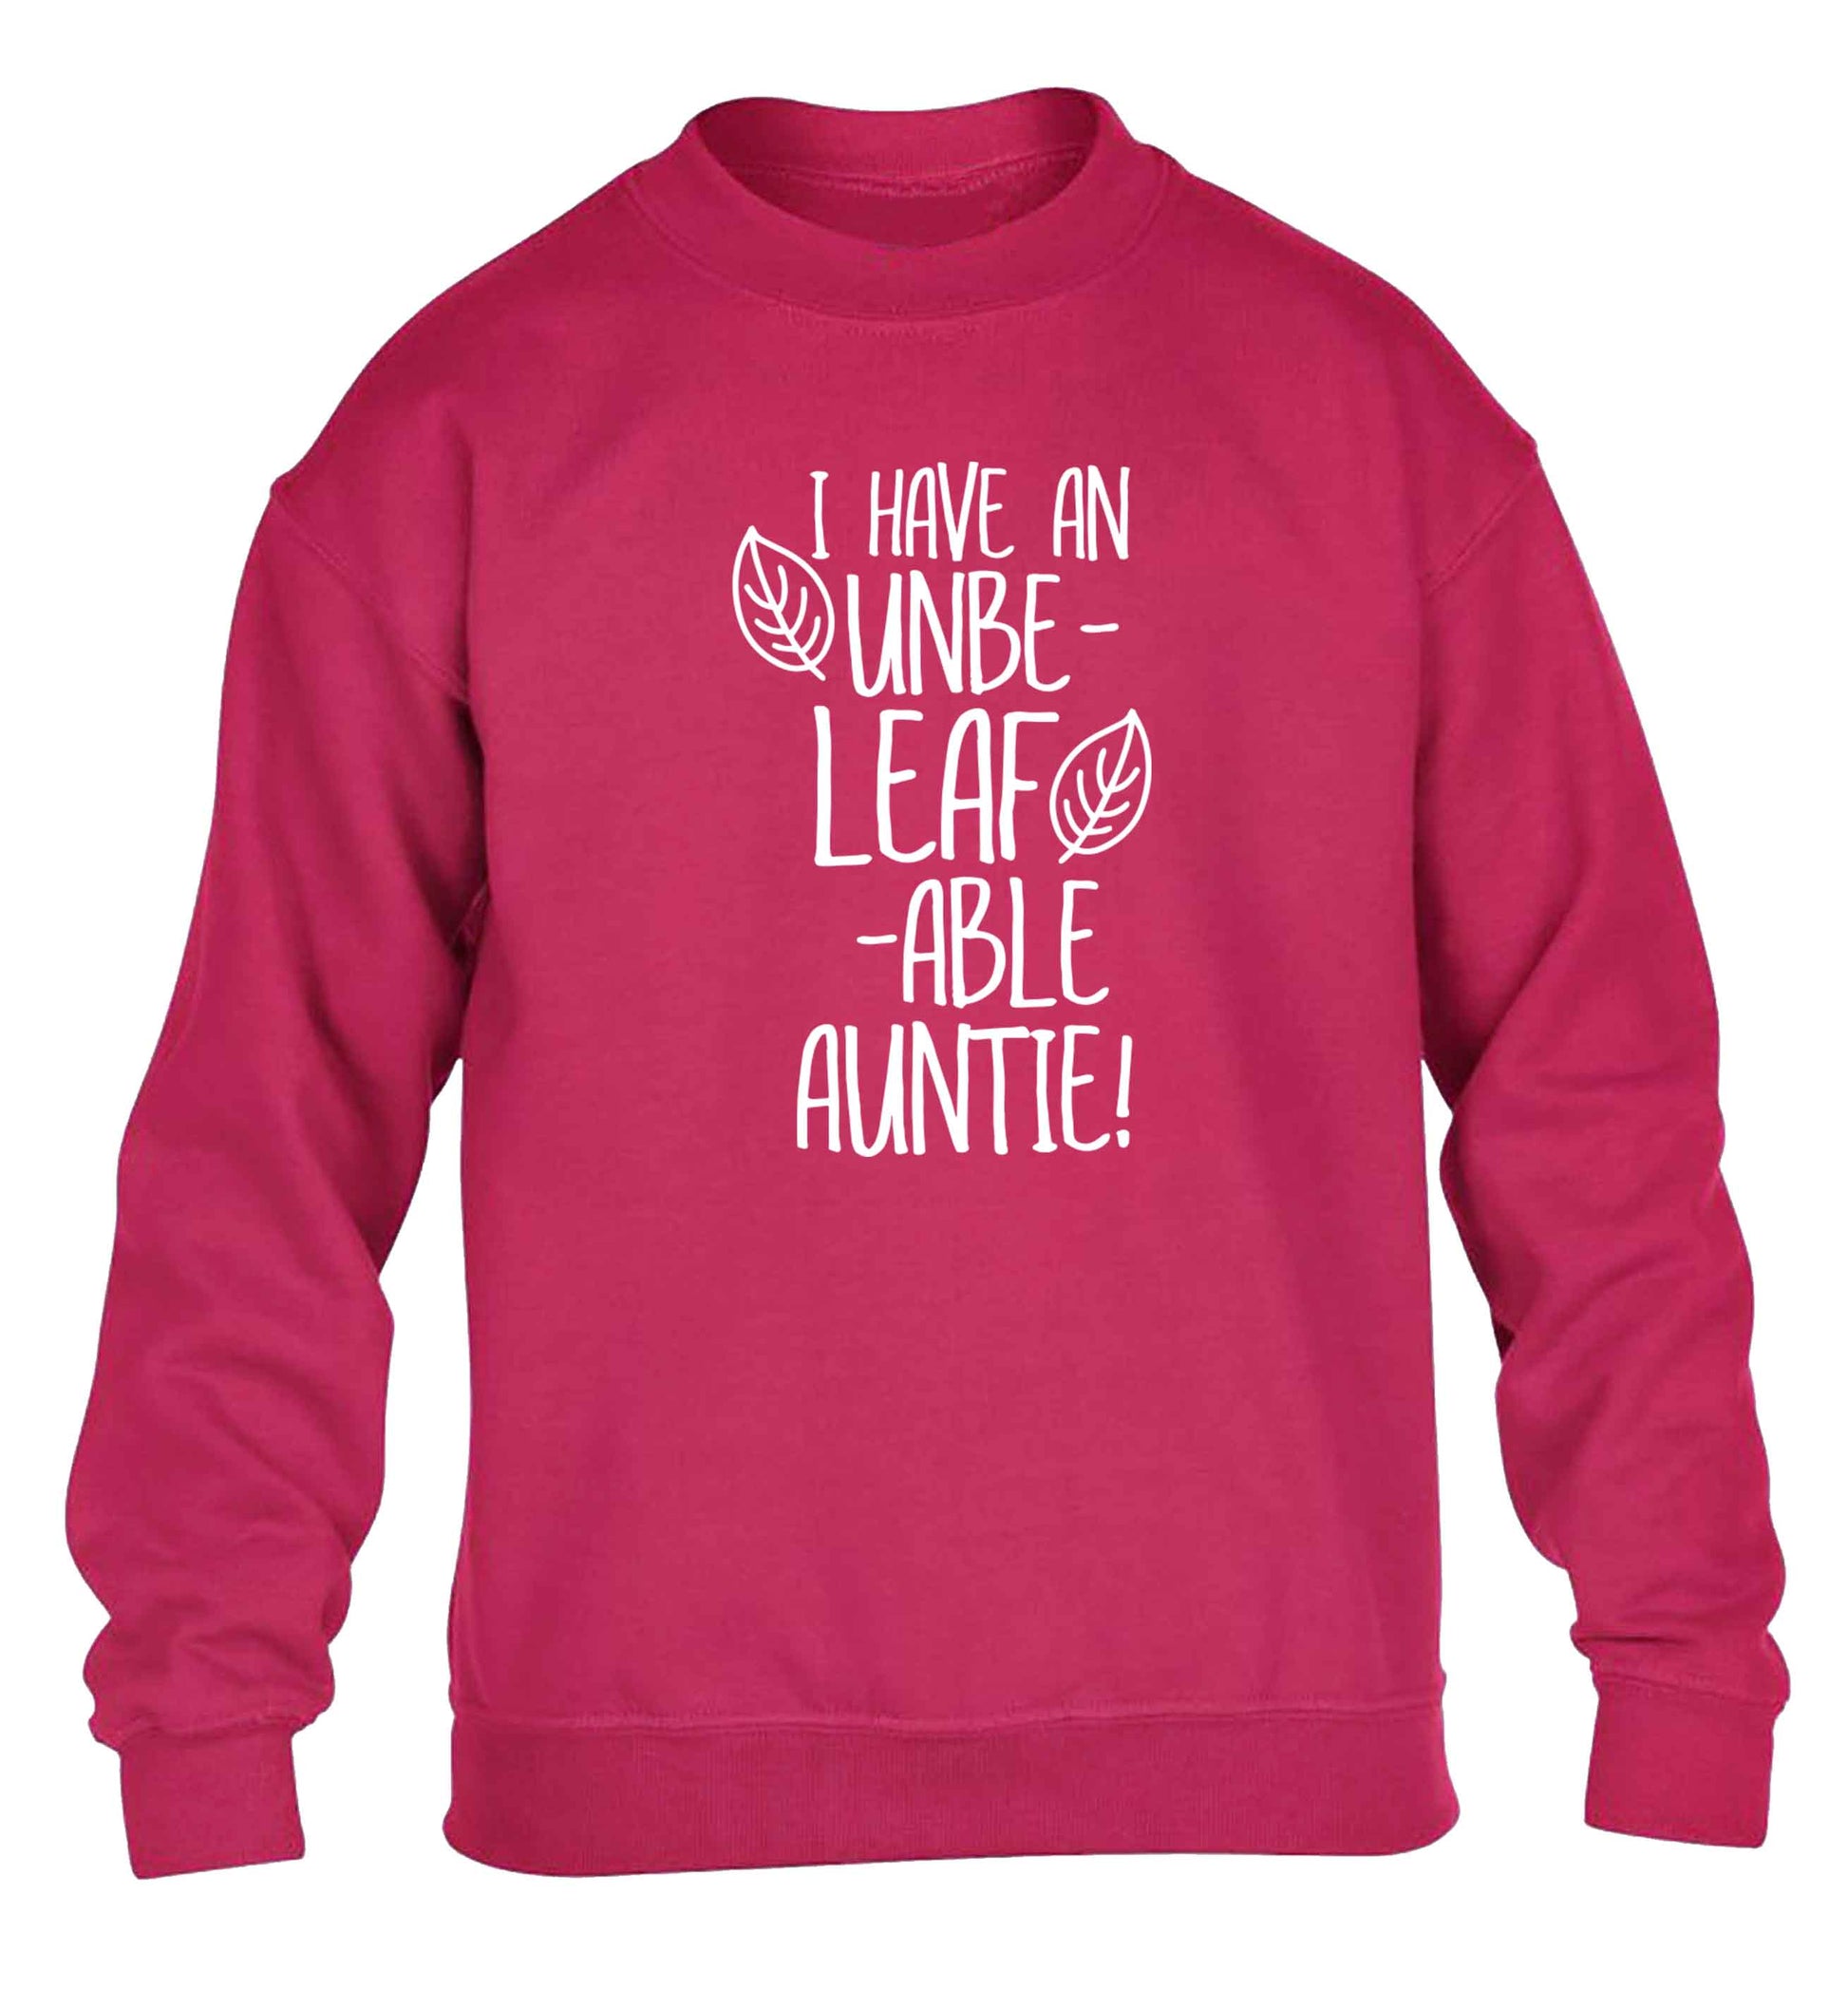 I have an unbe-leaf-able auntie children's pink sweater 12-13 Years